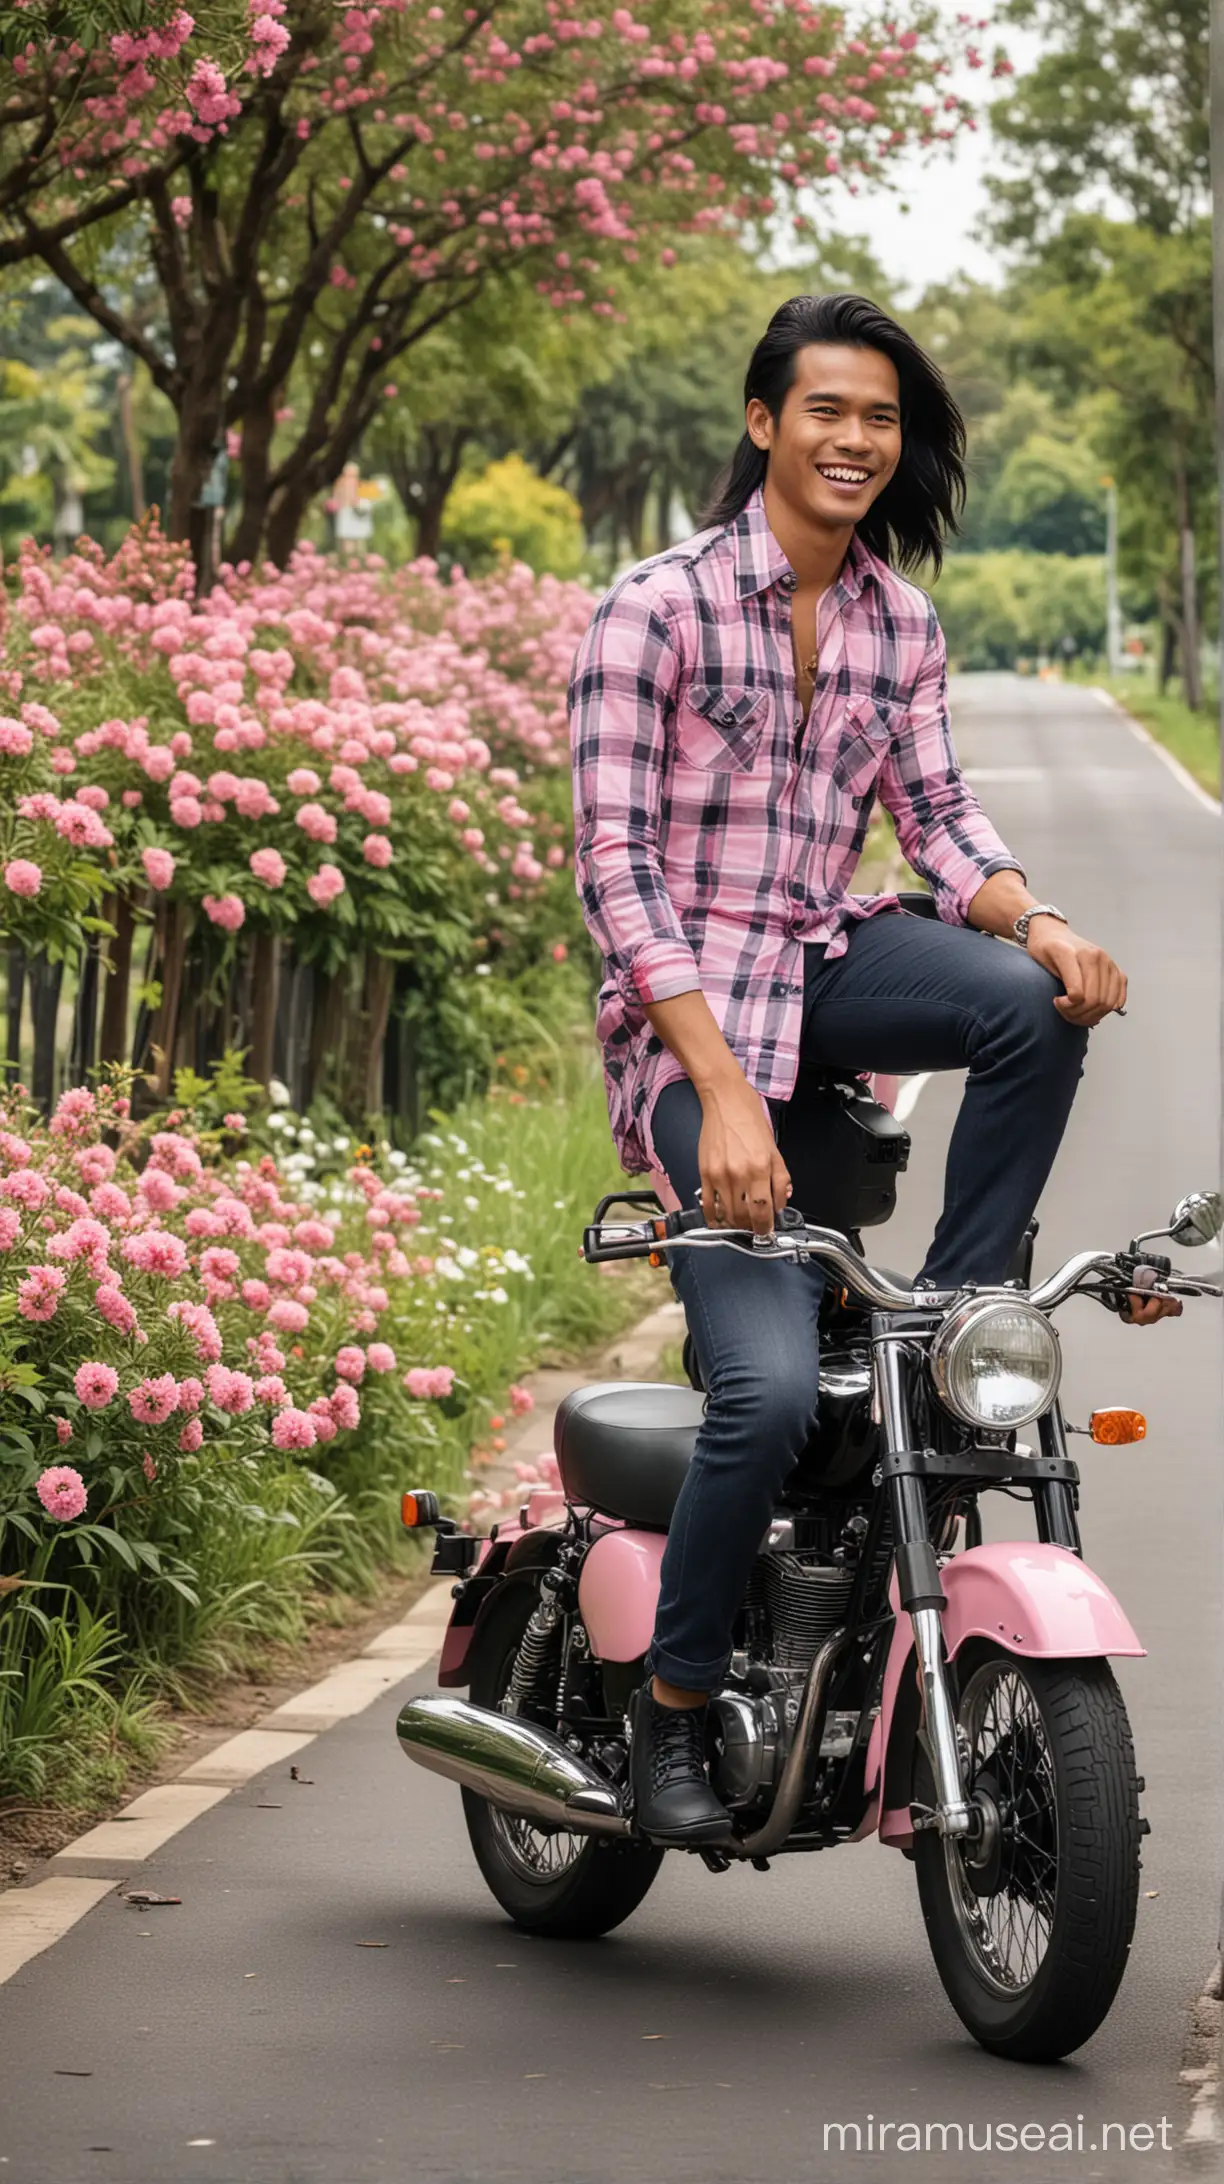 Handsome Indonesian Man Riding Classic Motorcycle with Beautiful Girl on Serene Treelined Road